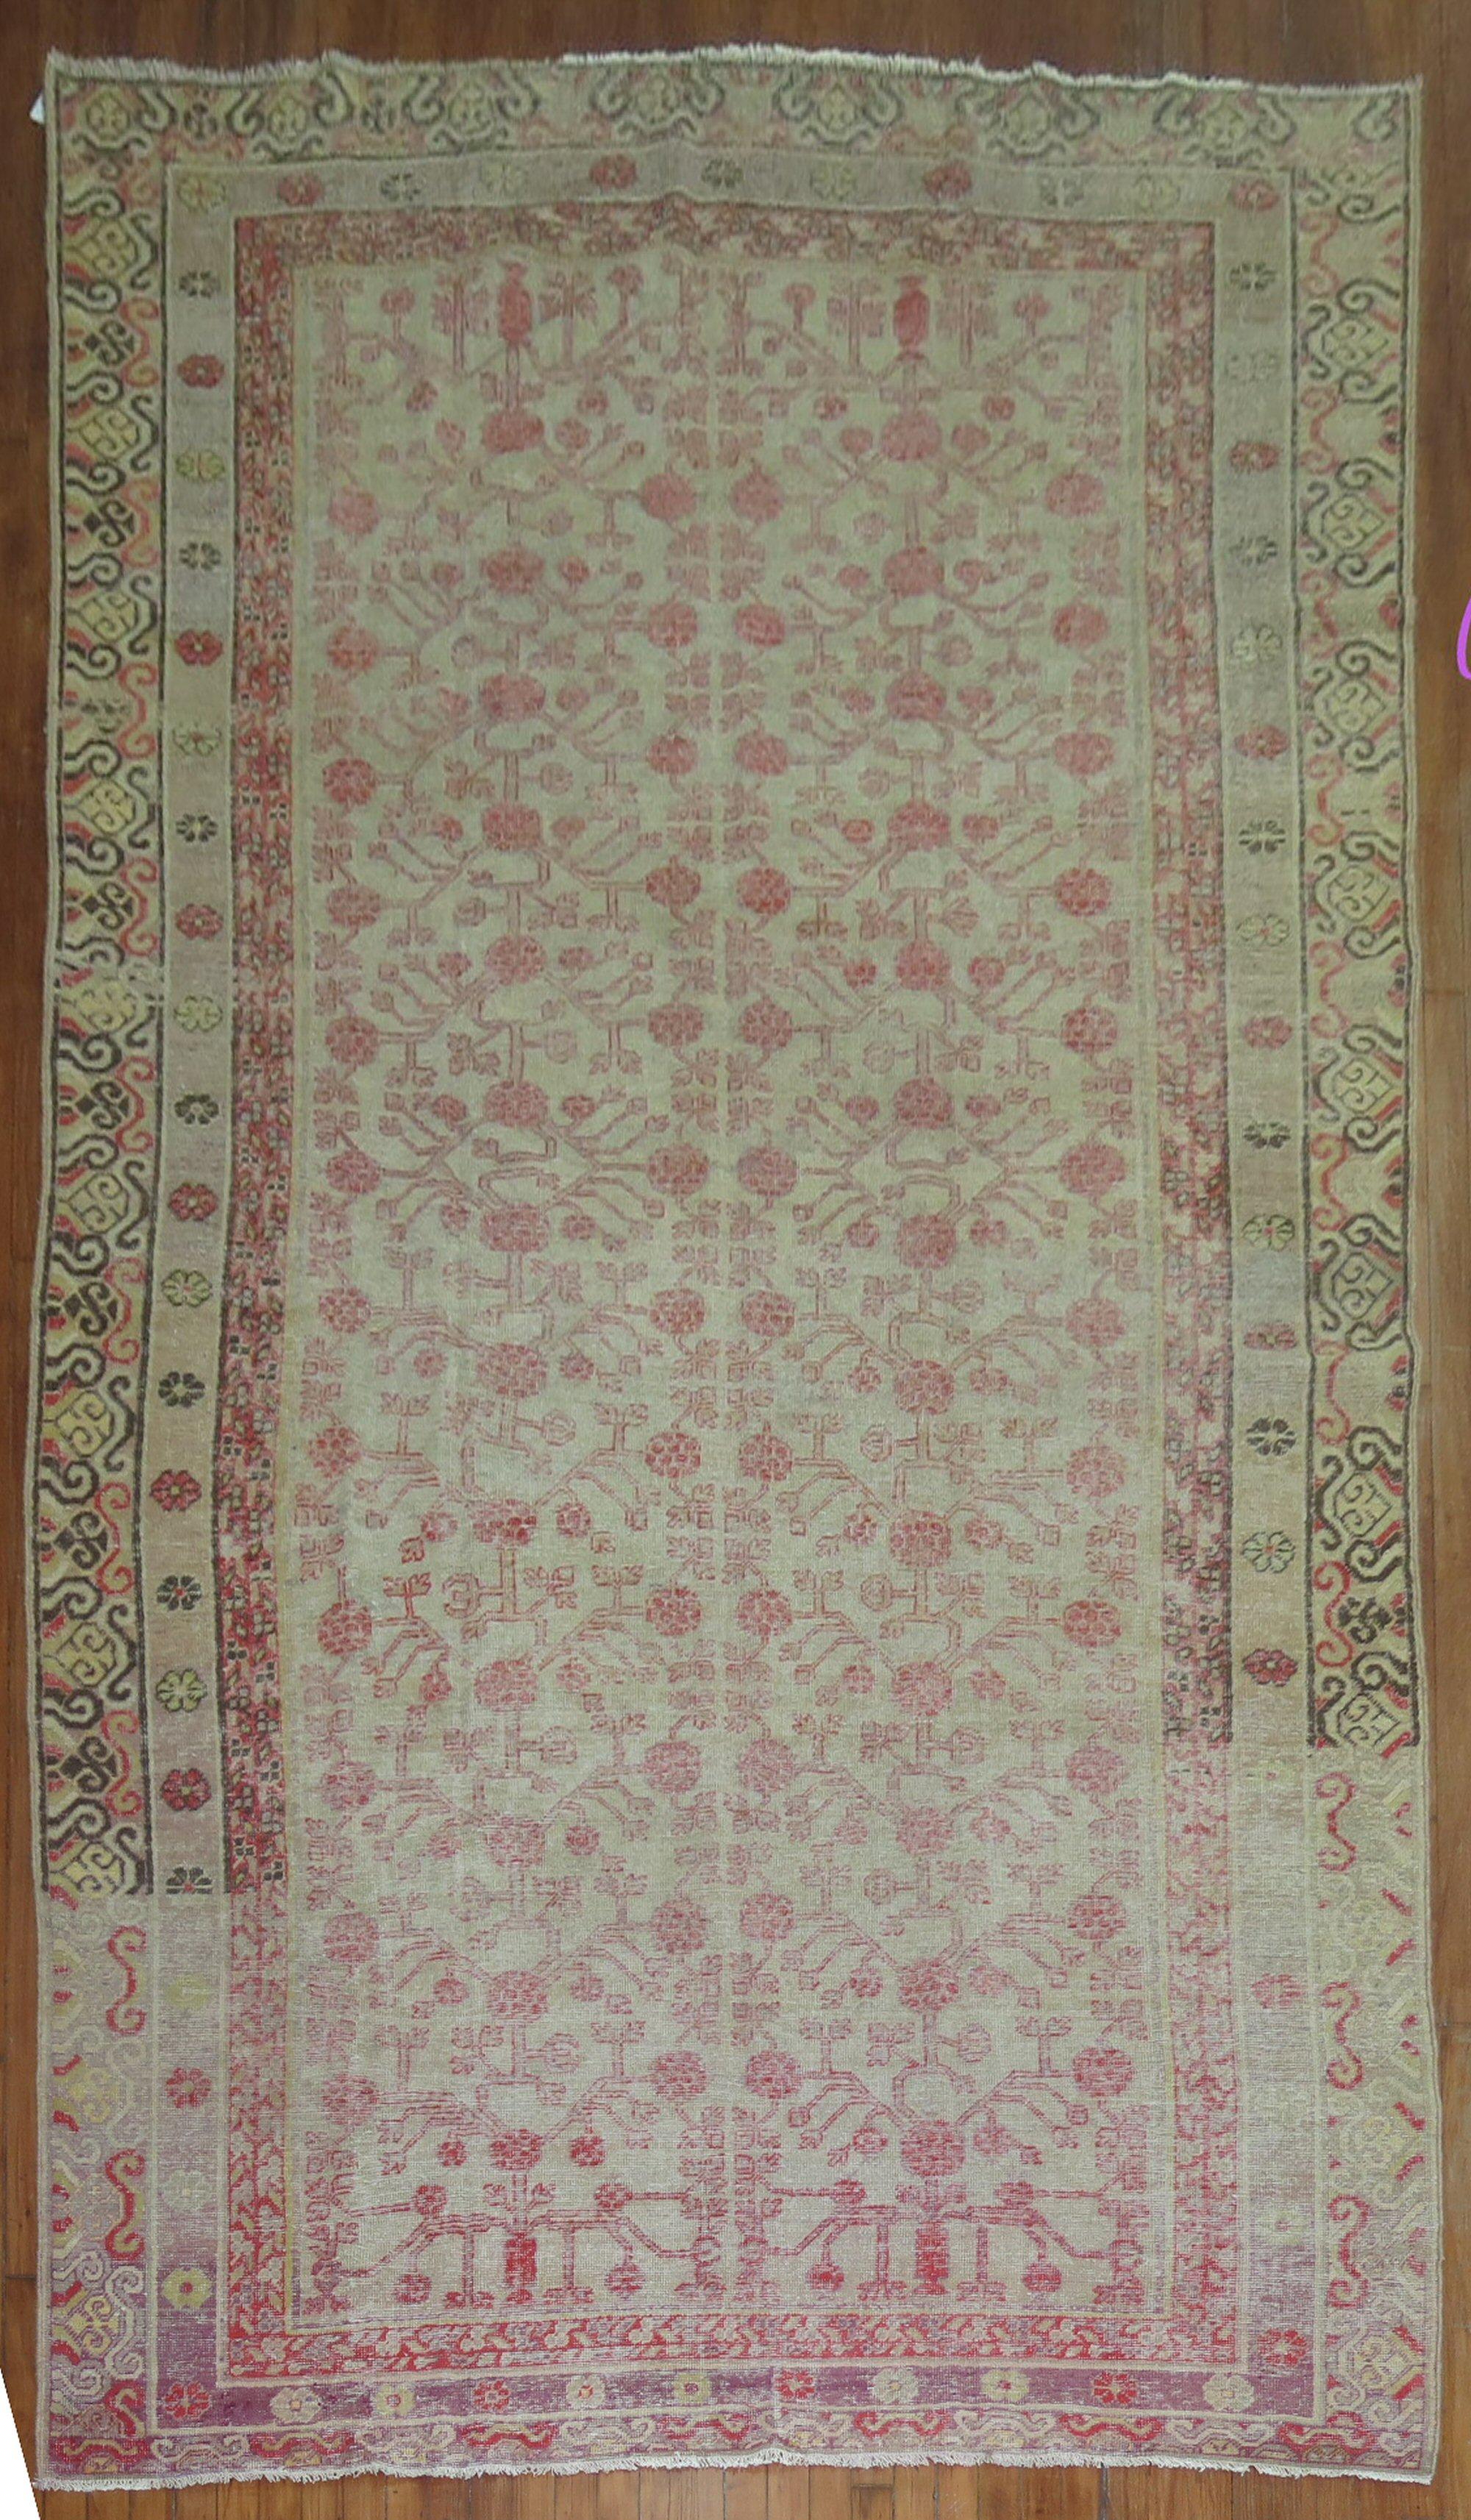 Gallery size worn Khotan rug from the 19th century with a pomegranate design.

Measures: 6'4'' x 13'2''.